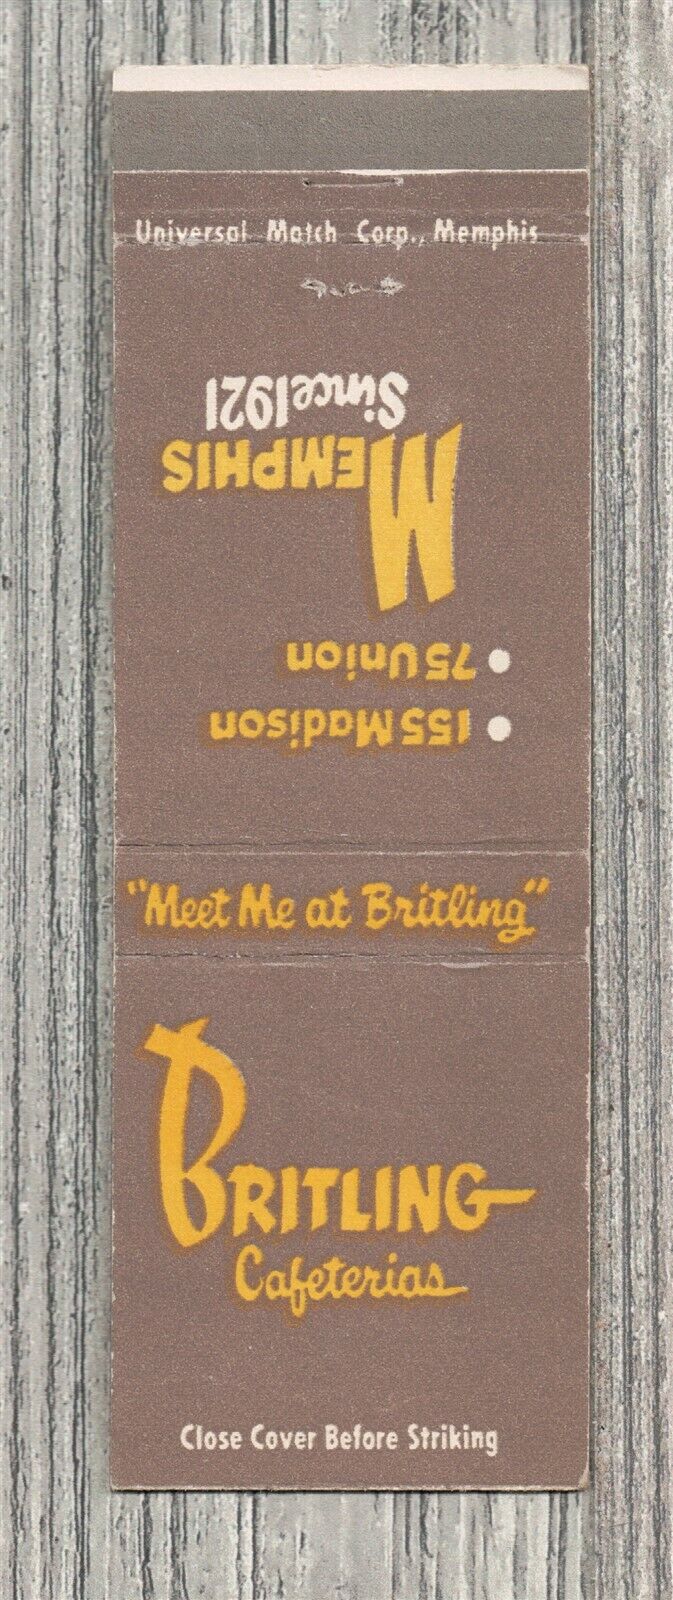 Matchbook Covers-Britling Cafeterias Memphis Tennessee-7045